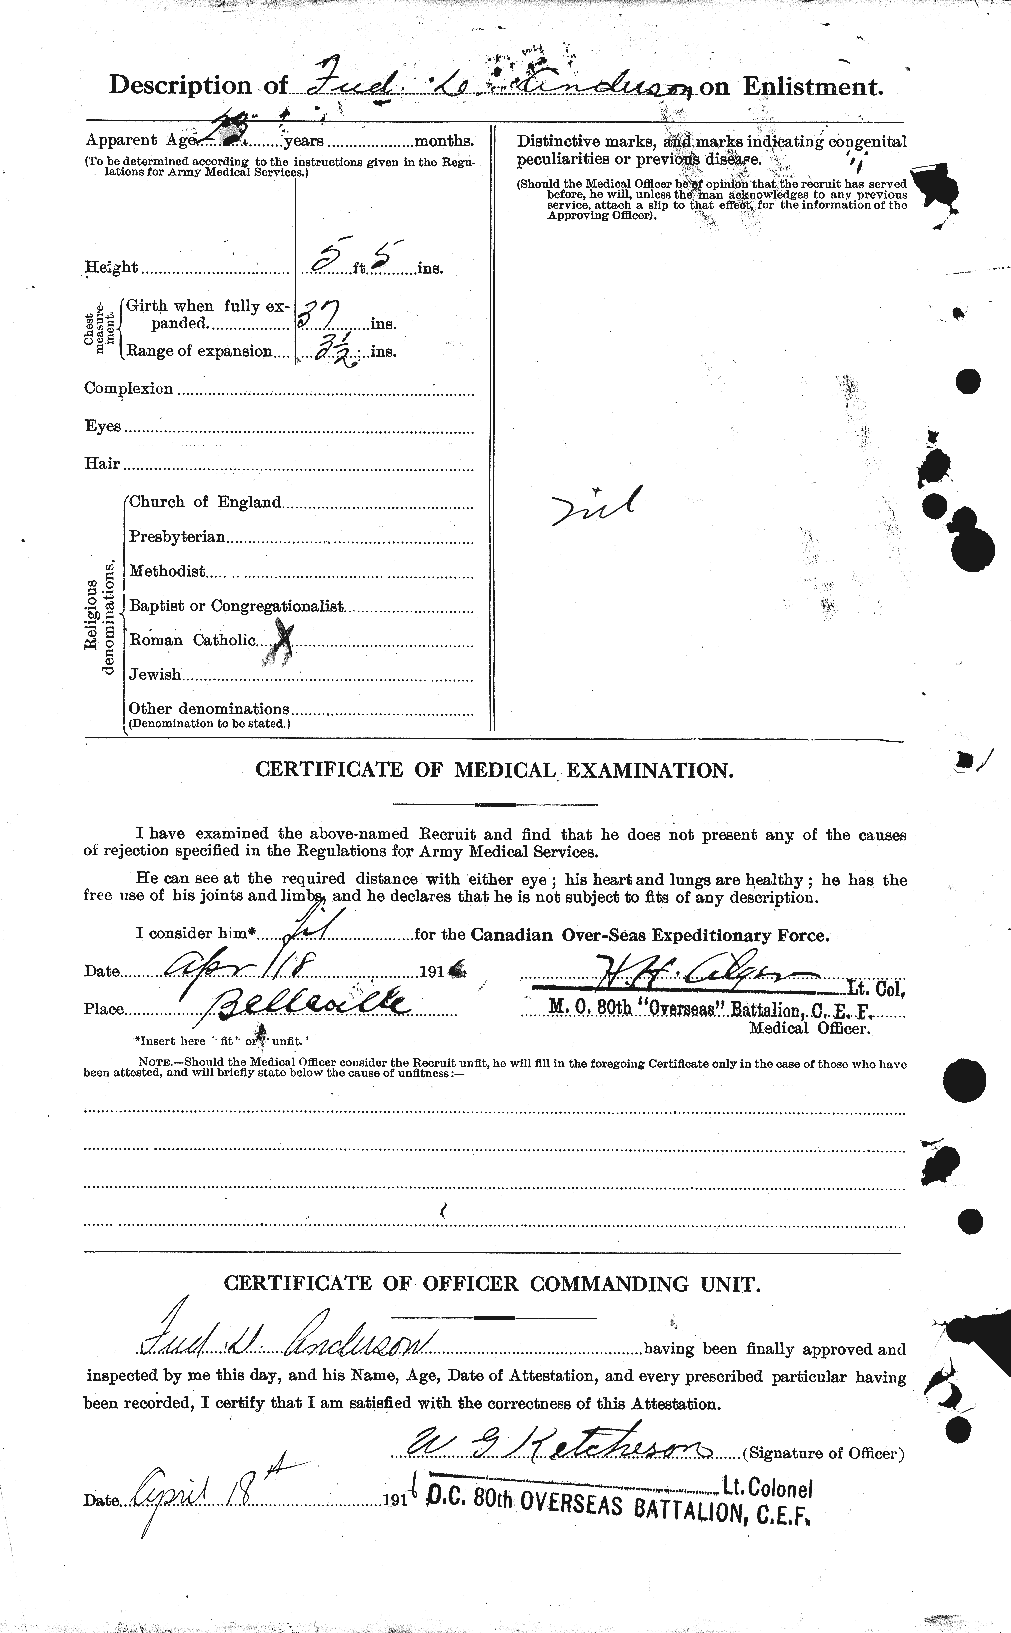 Personnel Records of the First World War - CEF 209835b